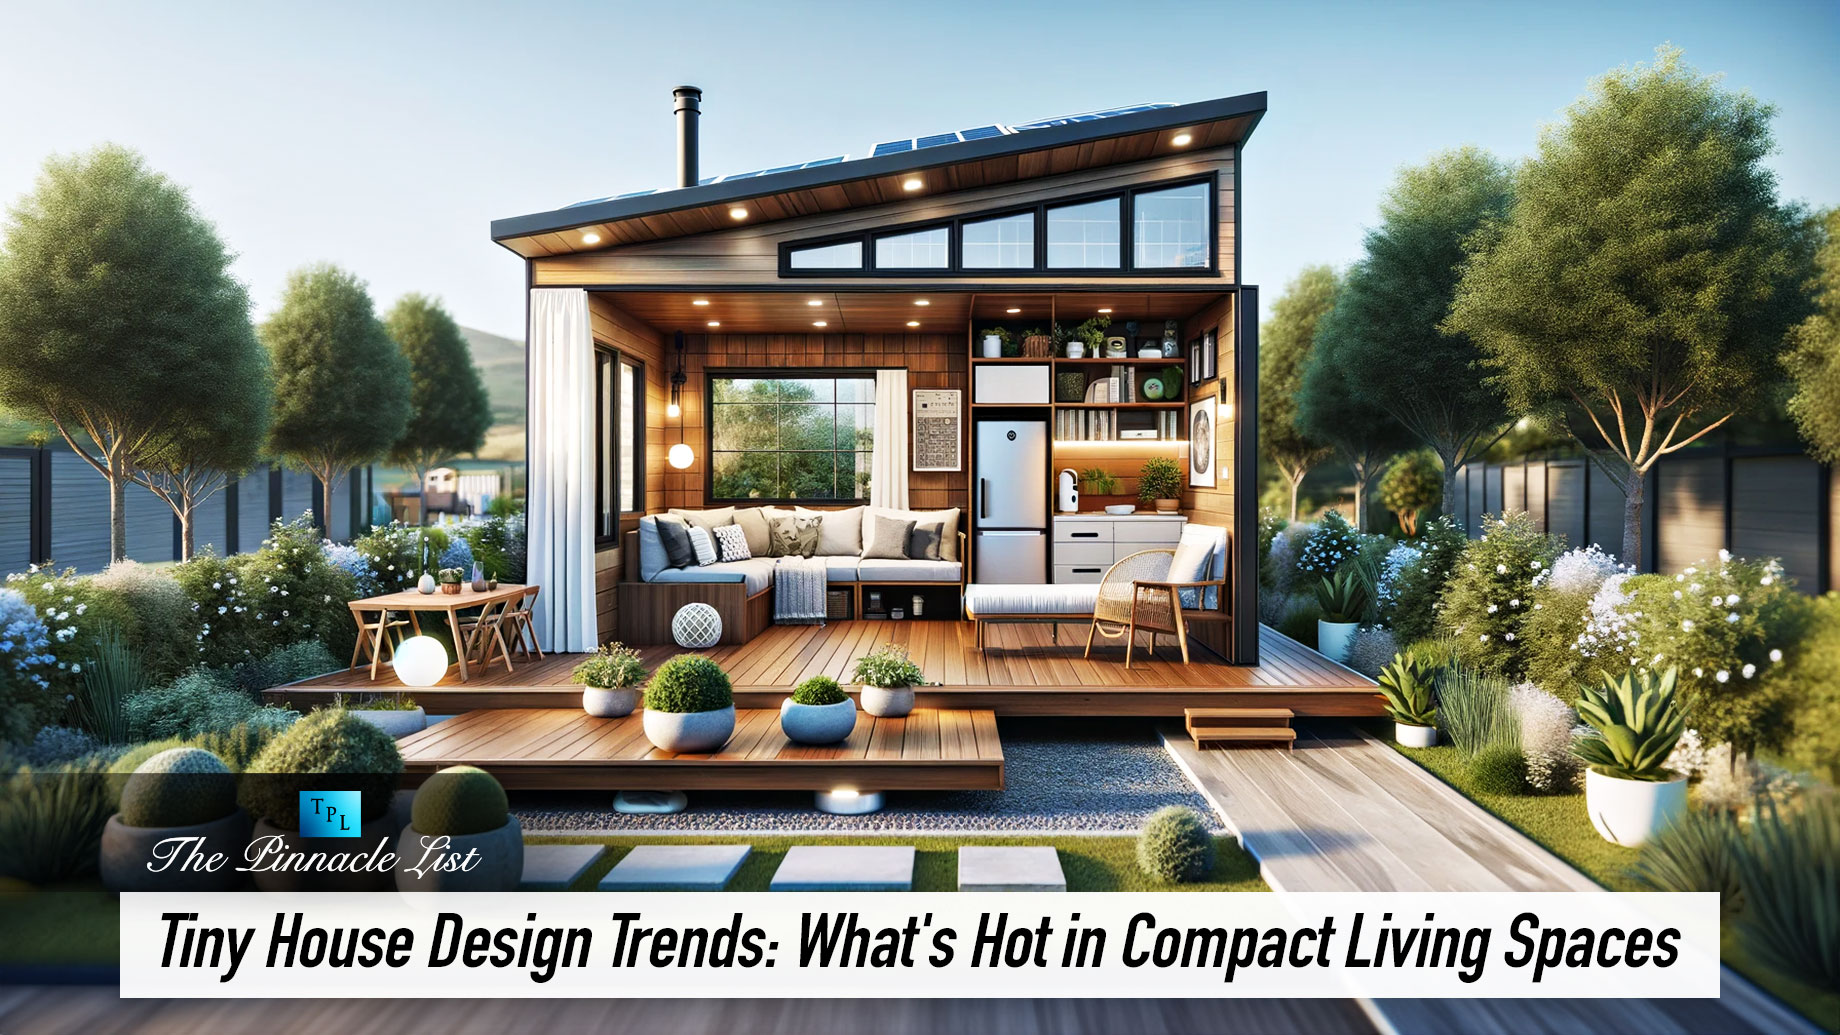 Tiny House Design Trends: What's Hot in Compact Living Spaces